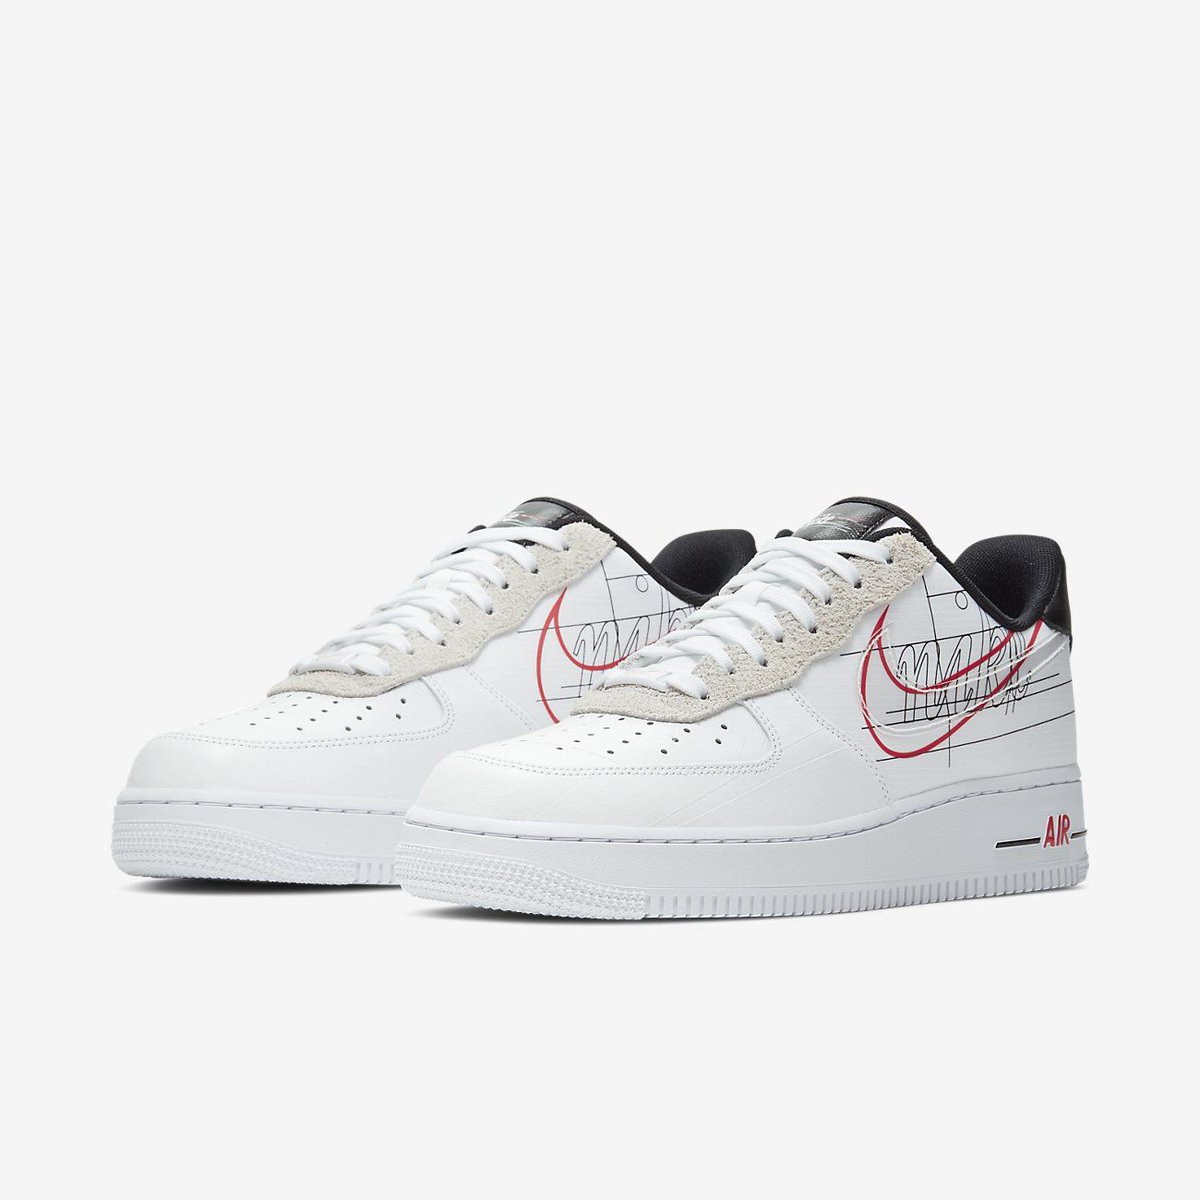 air force one evolution of the swoosh